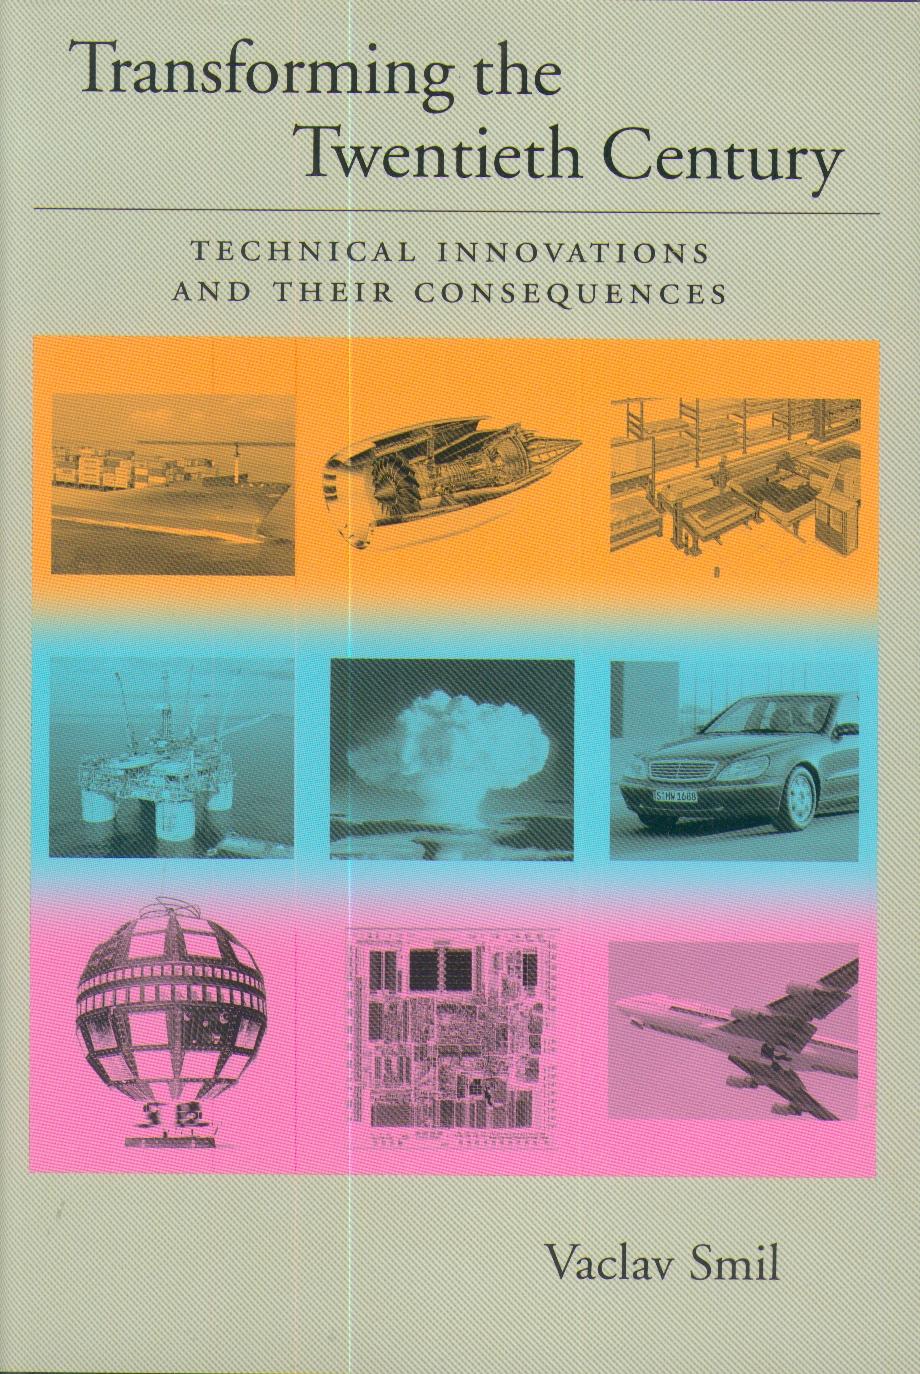 Transforming The Twentieth Century: Technical Innovations And Their Consequences Vol.2